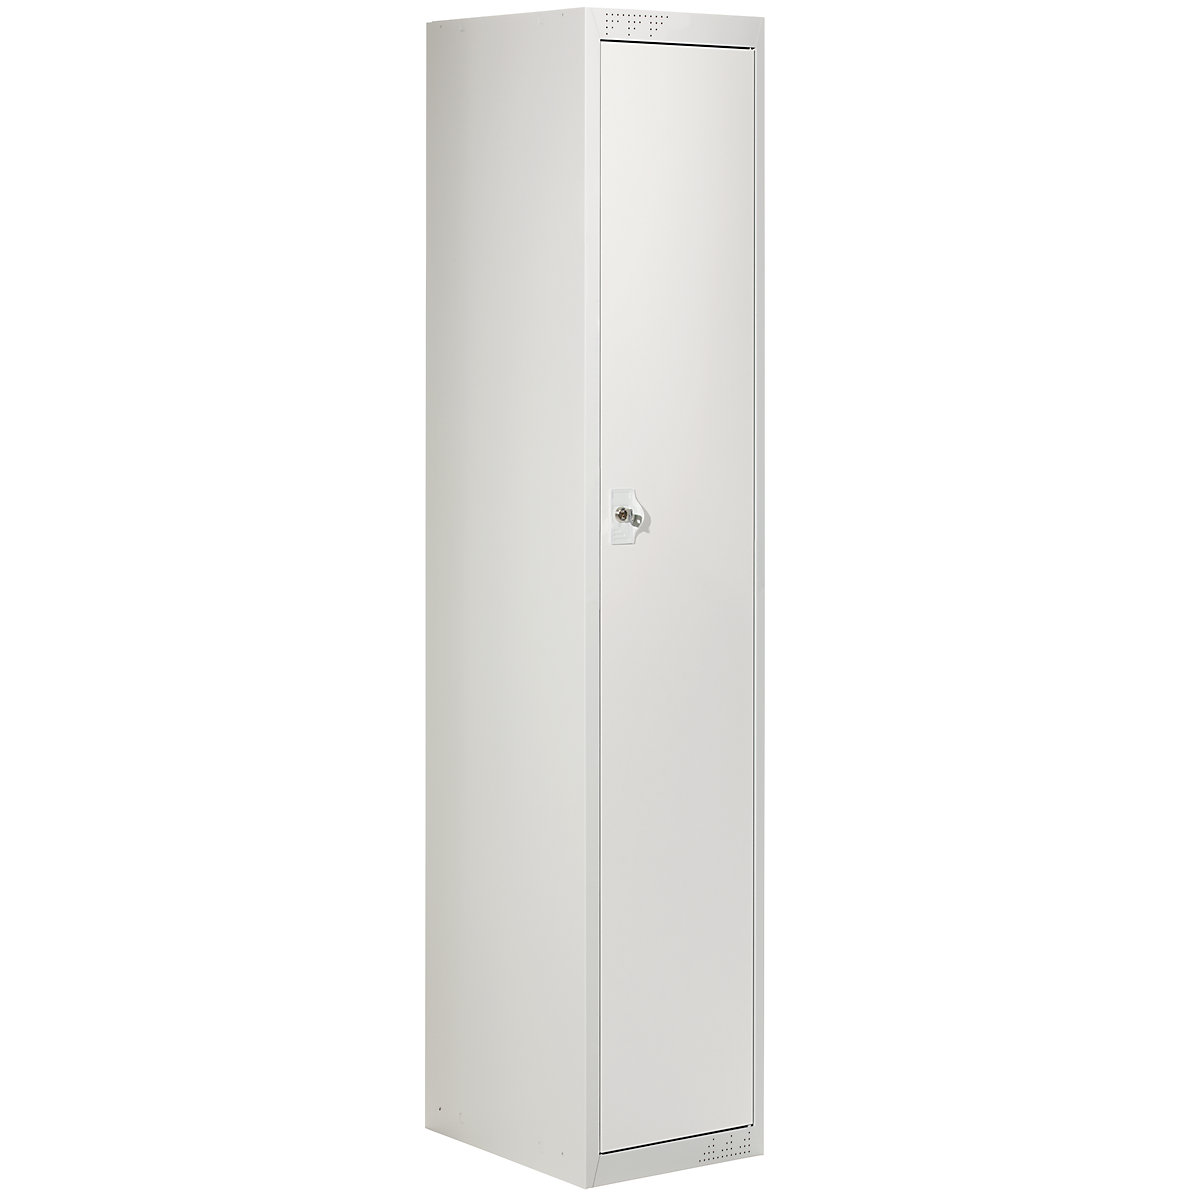 Cloakroom locker system – eurokraft basic, with standard and extension modules, HxWxD 1800 x 300 x 500 mm, 1 hat shelf, 1 clothes rail, light grey, extension module-16